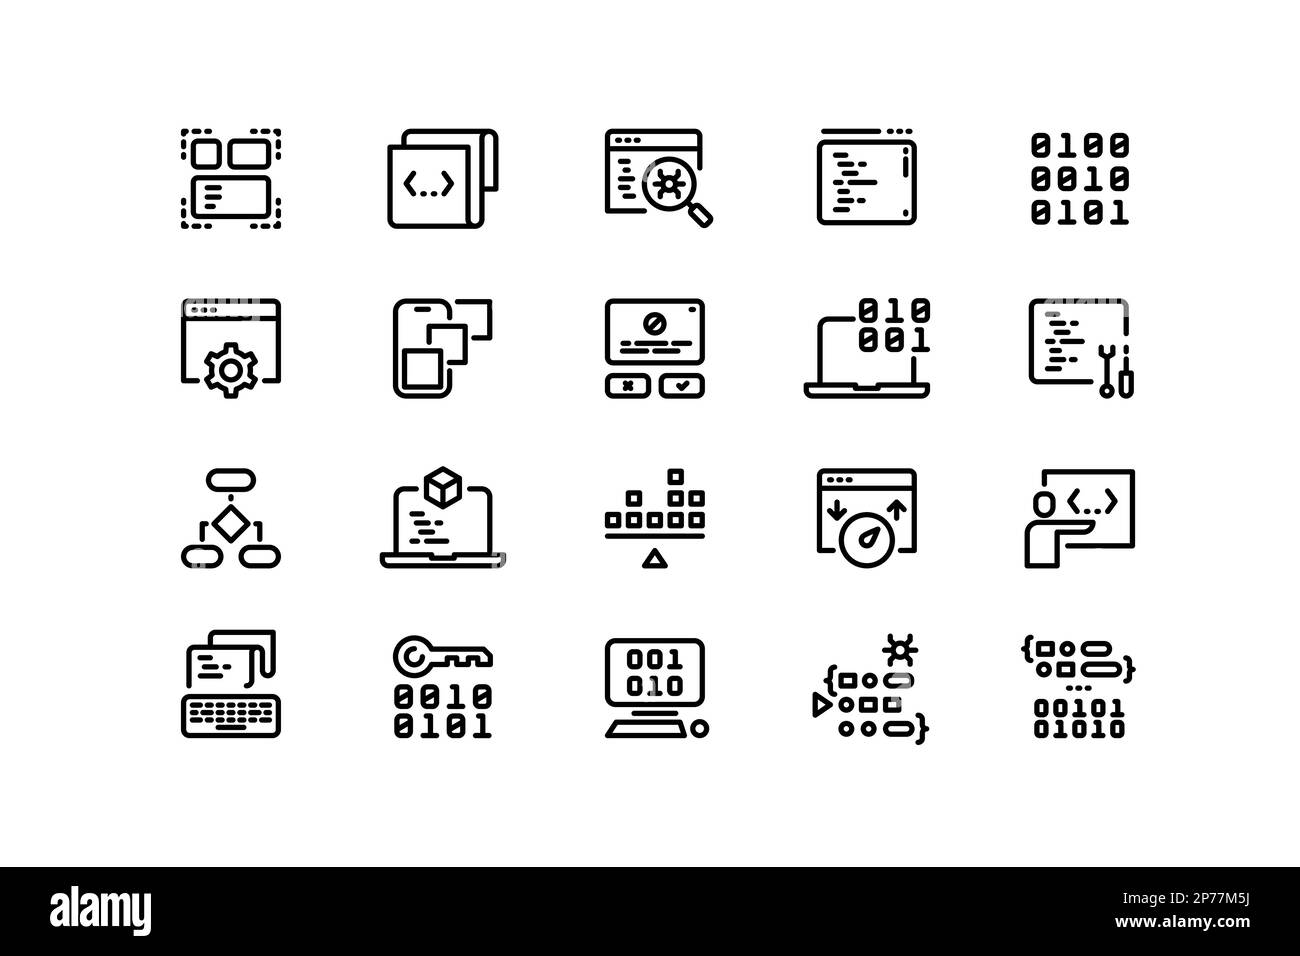 Coding line icons. Program code editing, running and debugging, software architecture, application development and optimization. Vector editable Stock Vector